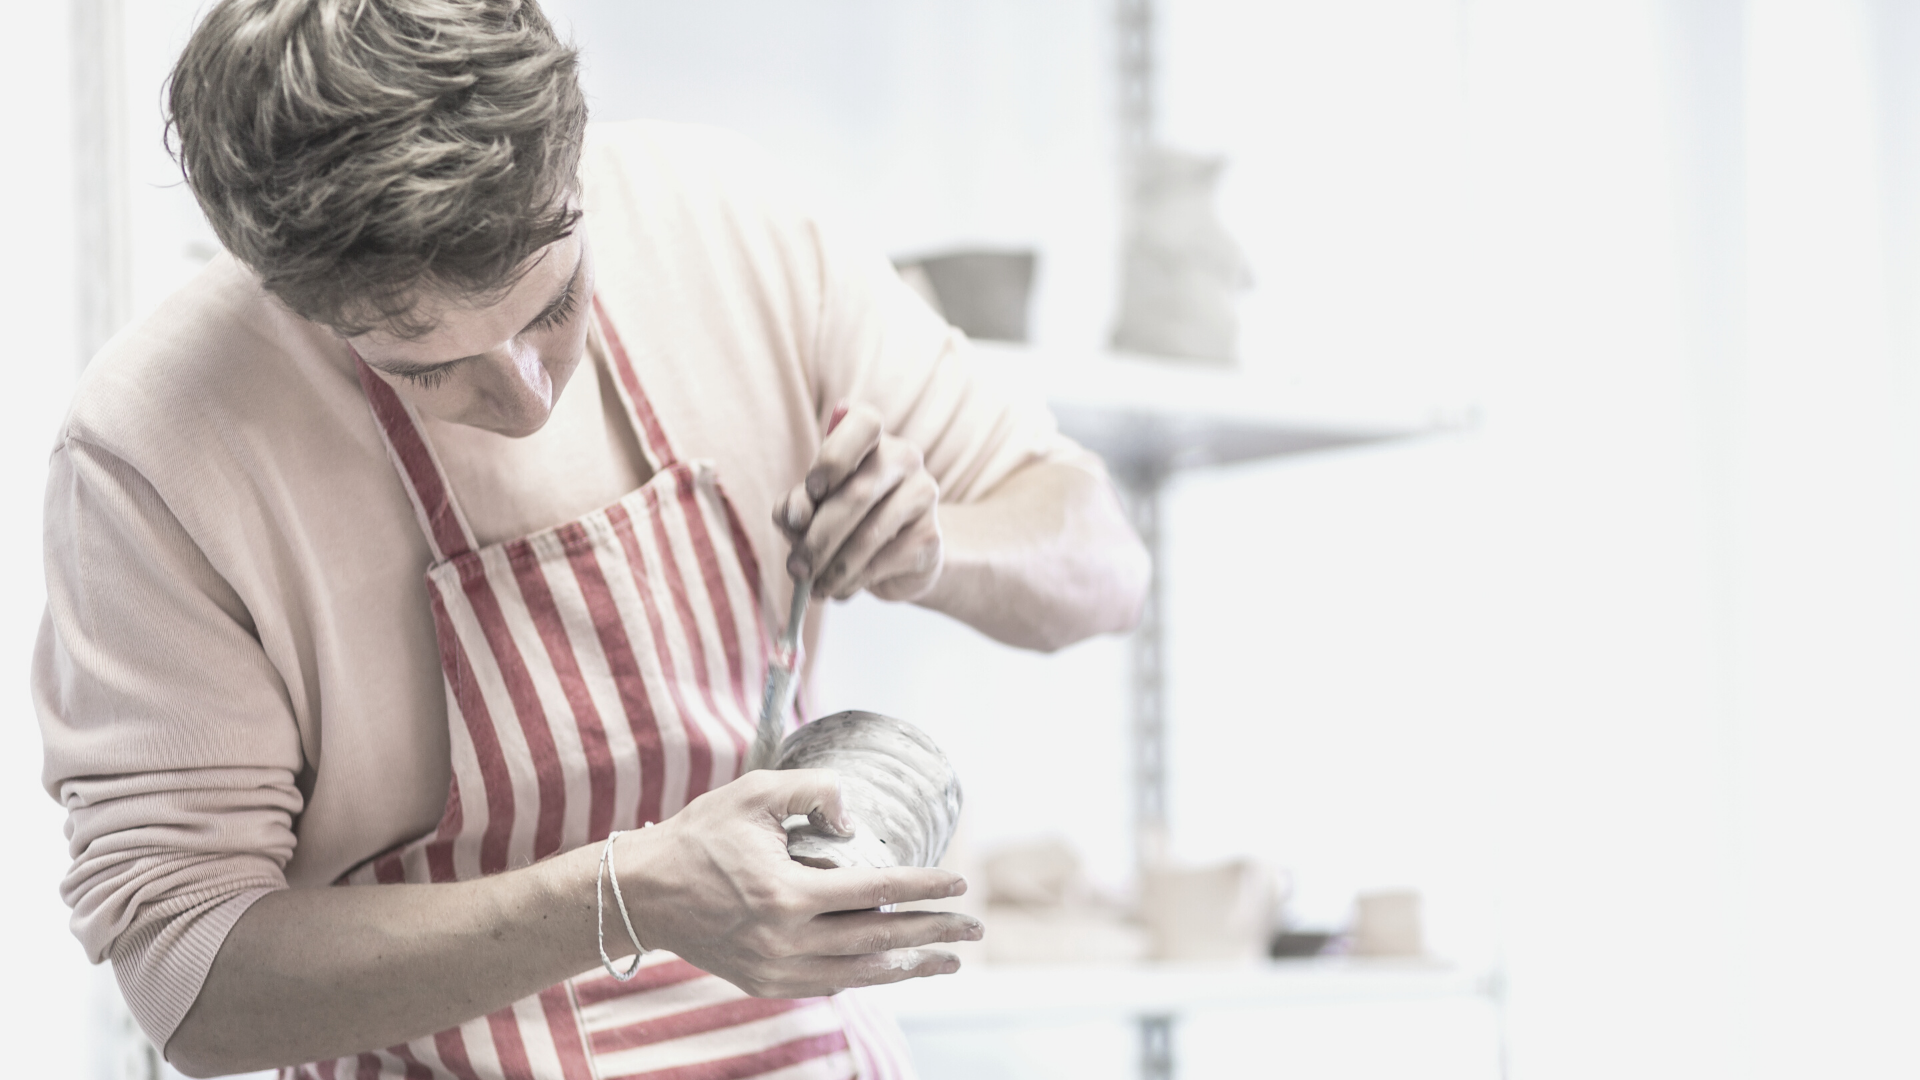 man in apron using a brush to glaze a small ceramic pot